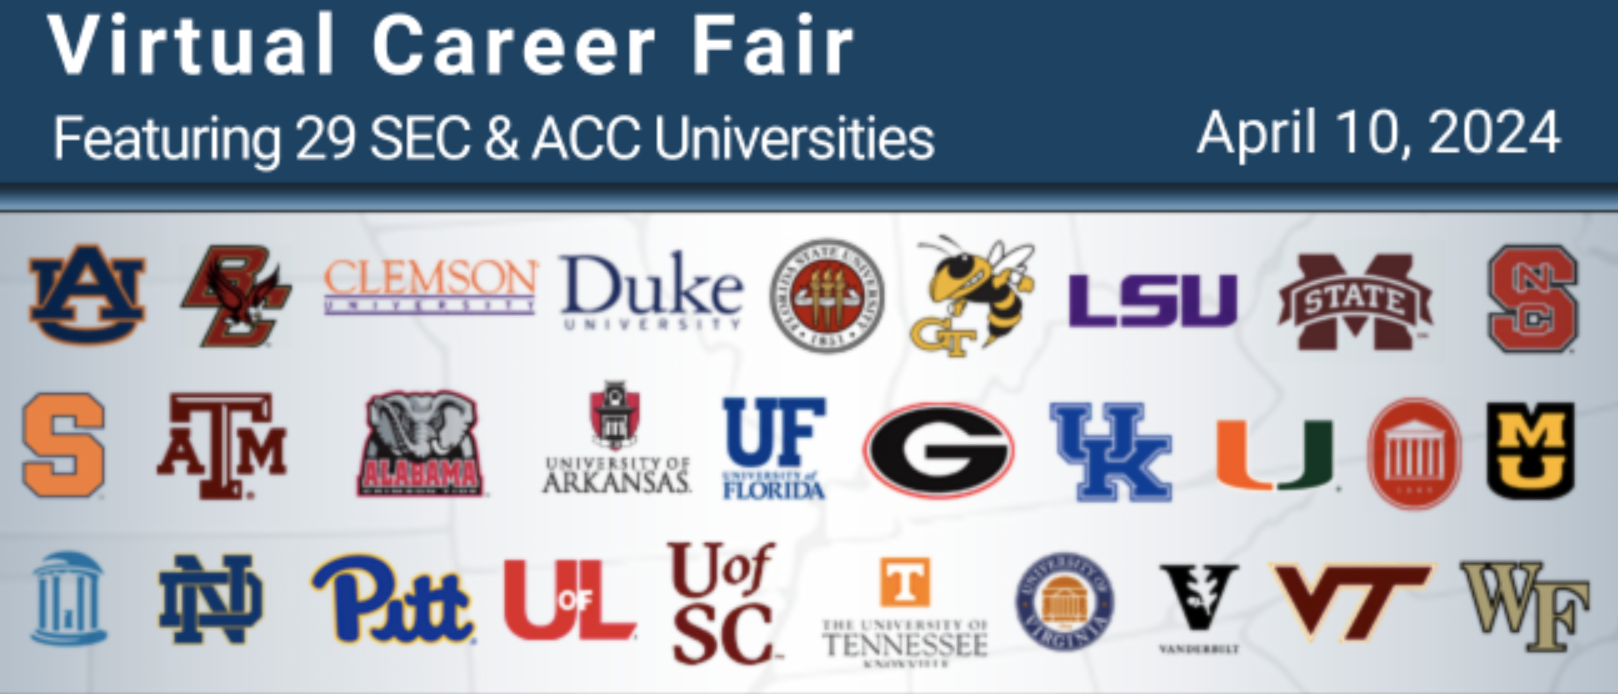 SEC & ACC Virtual Career Fair, Wednesday, April 10, 2024 from 9am-4pm CST.